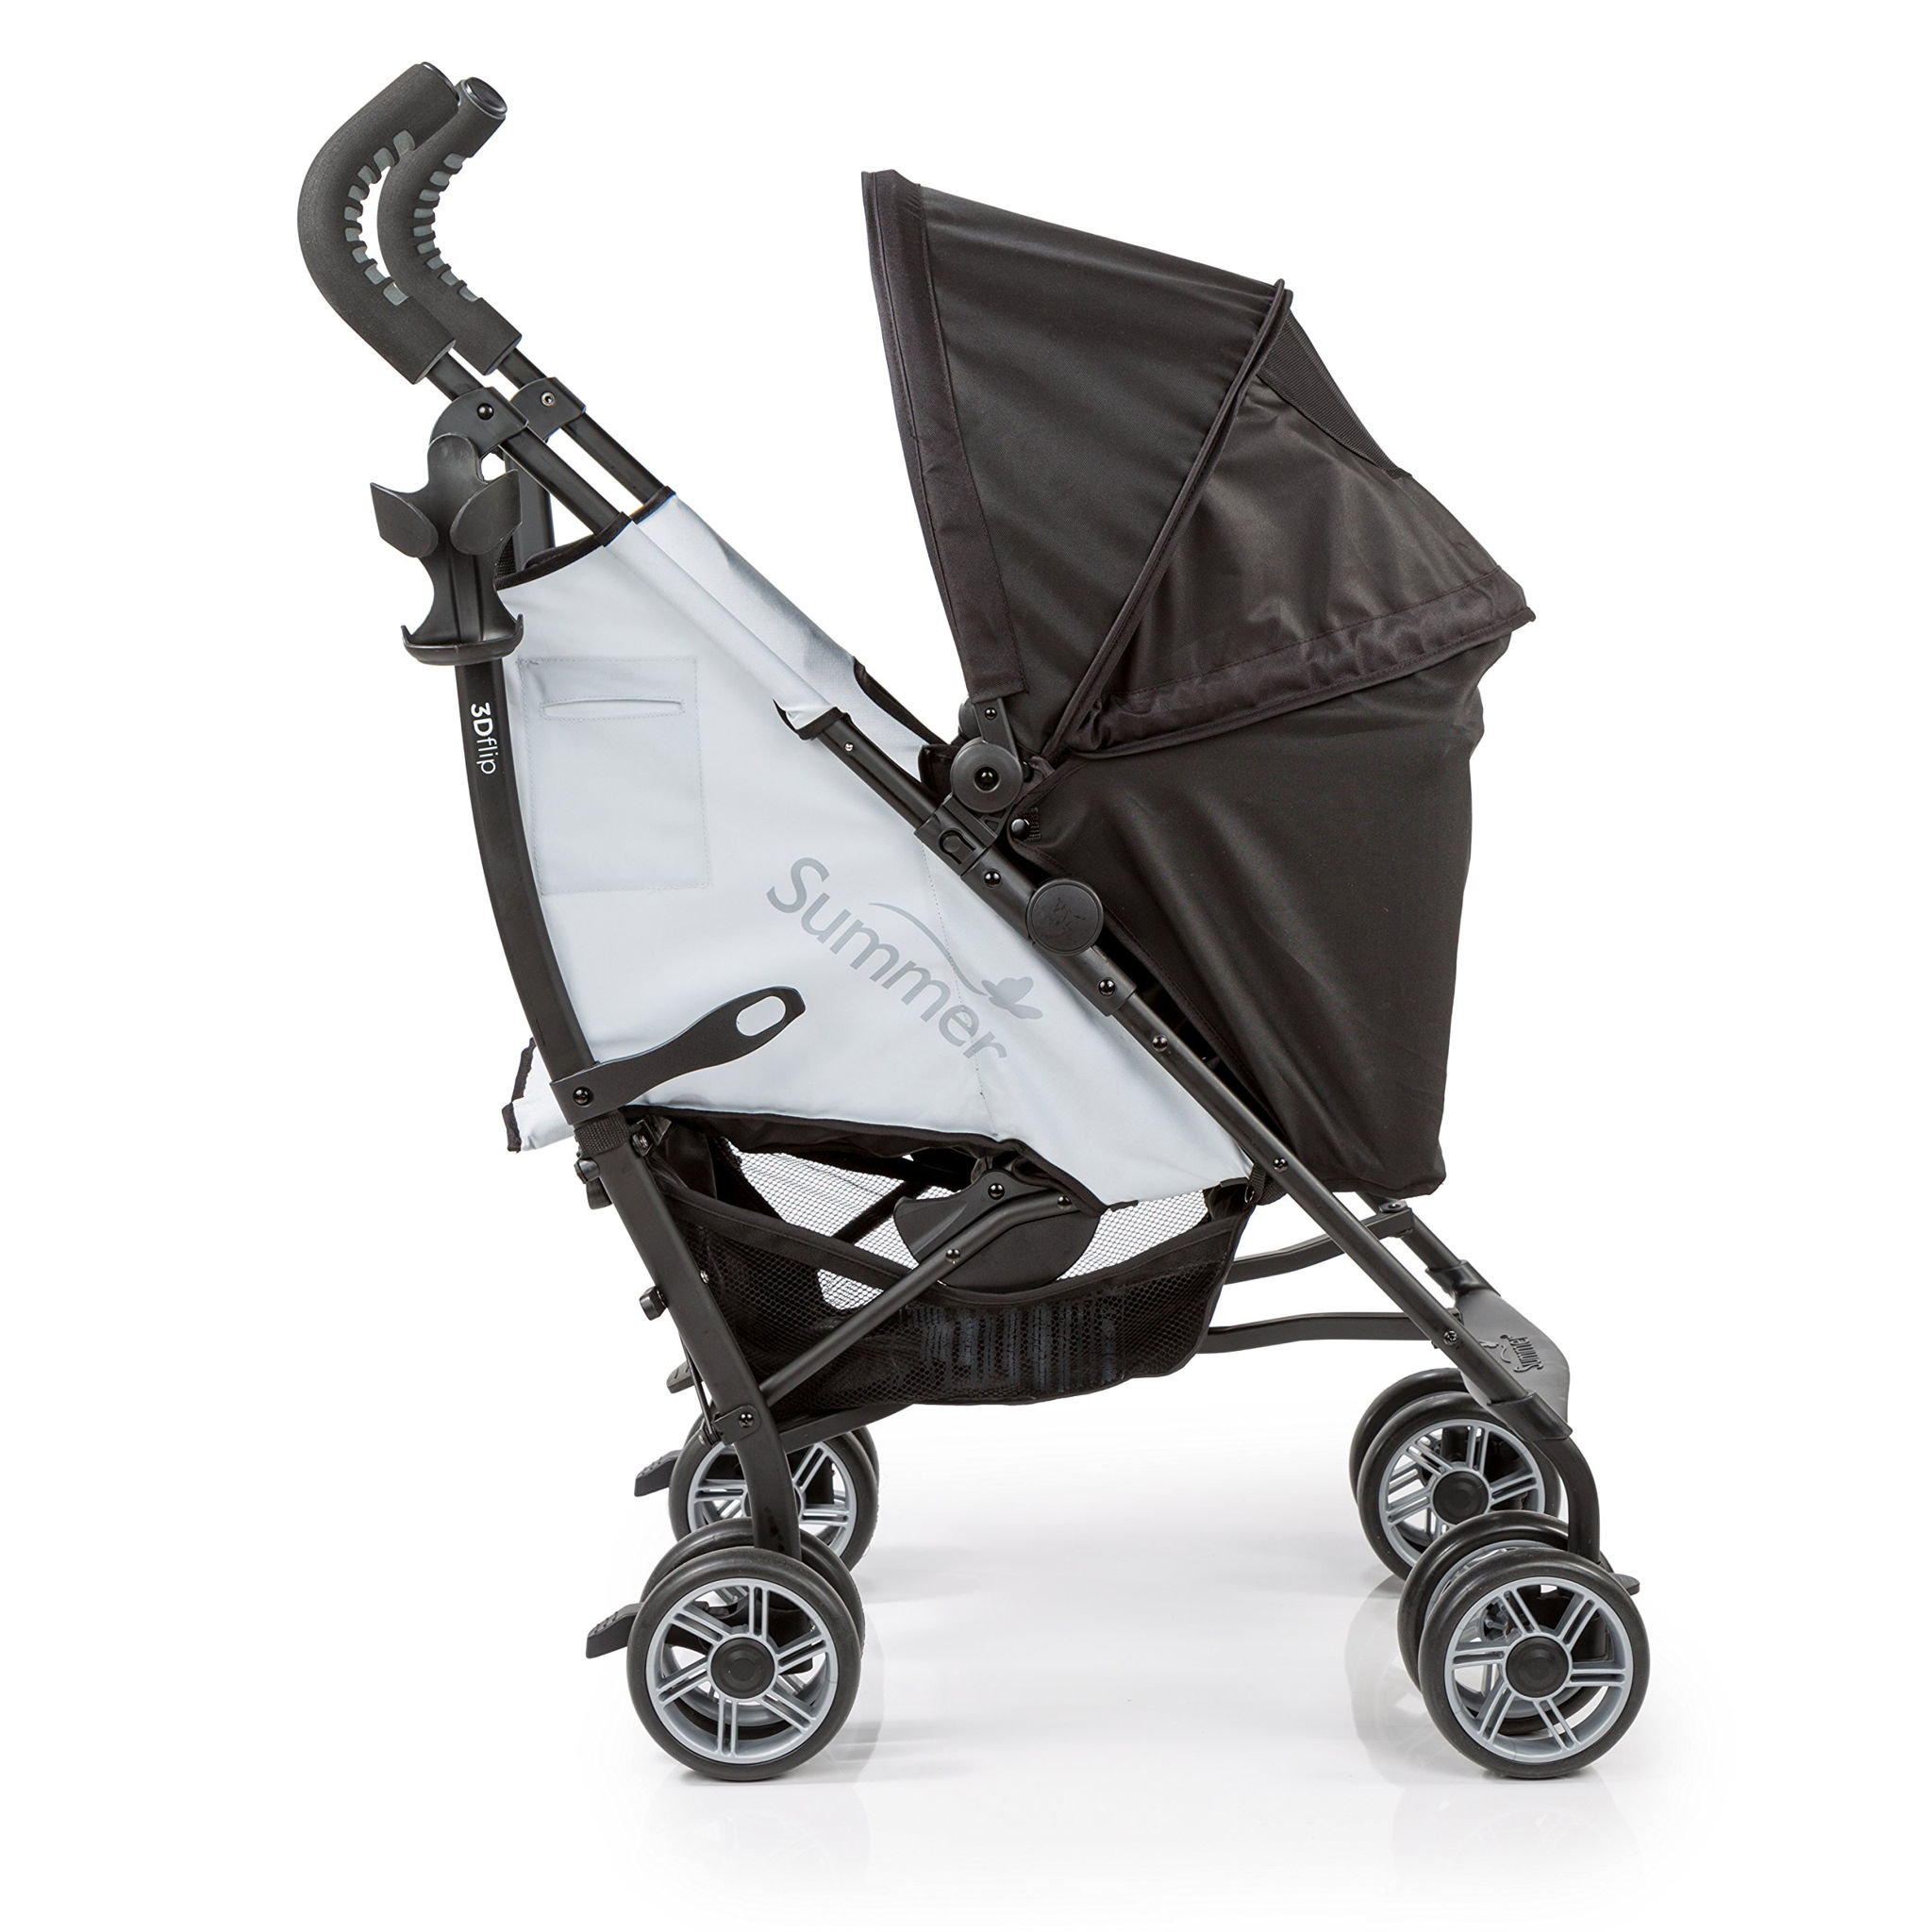 uppababy g luxe vs summer infant 3d